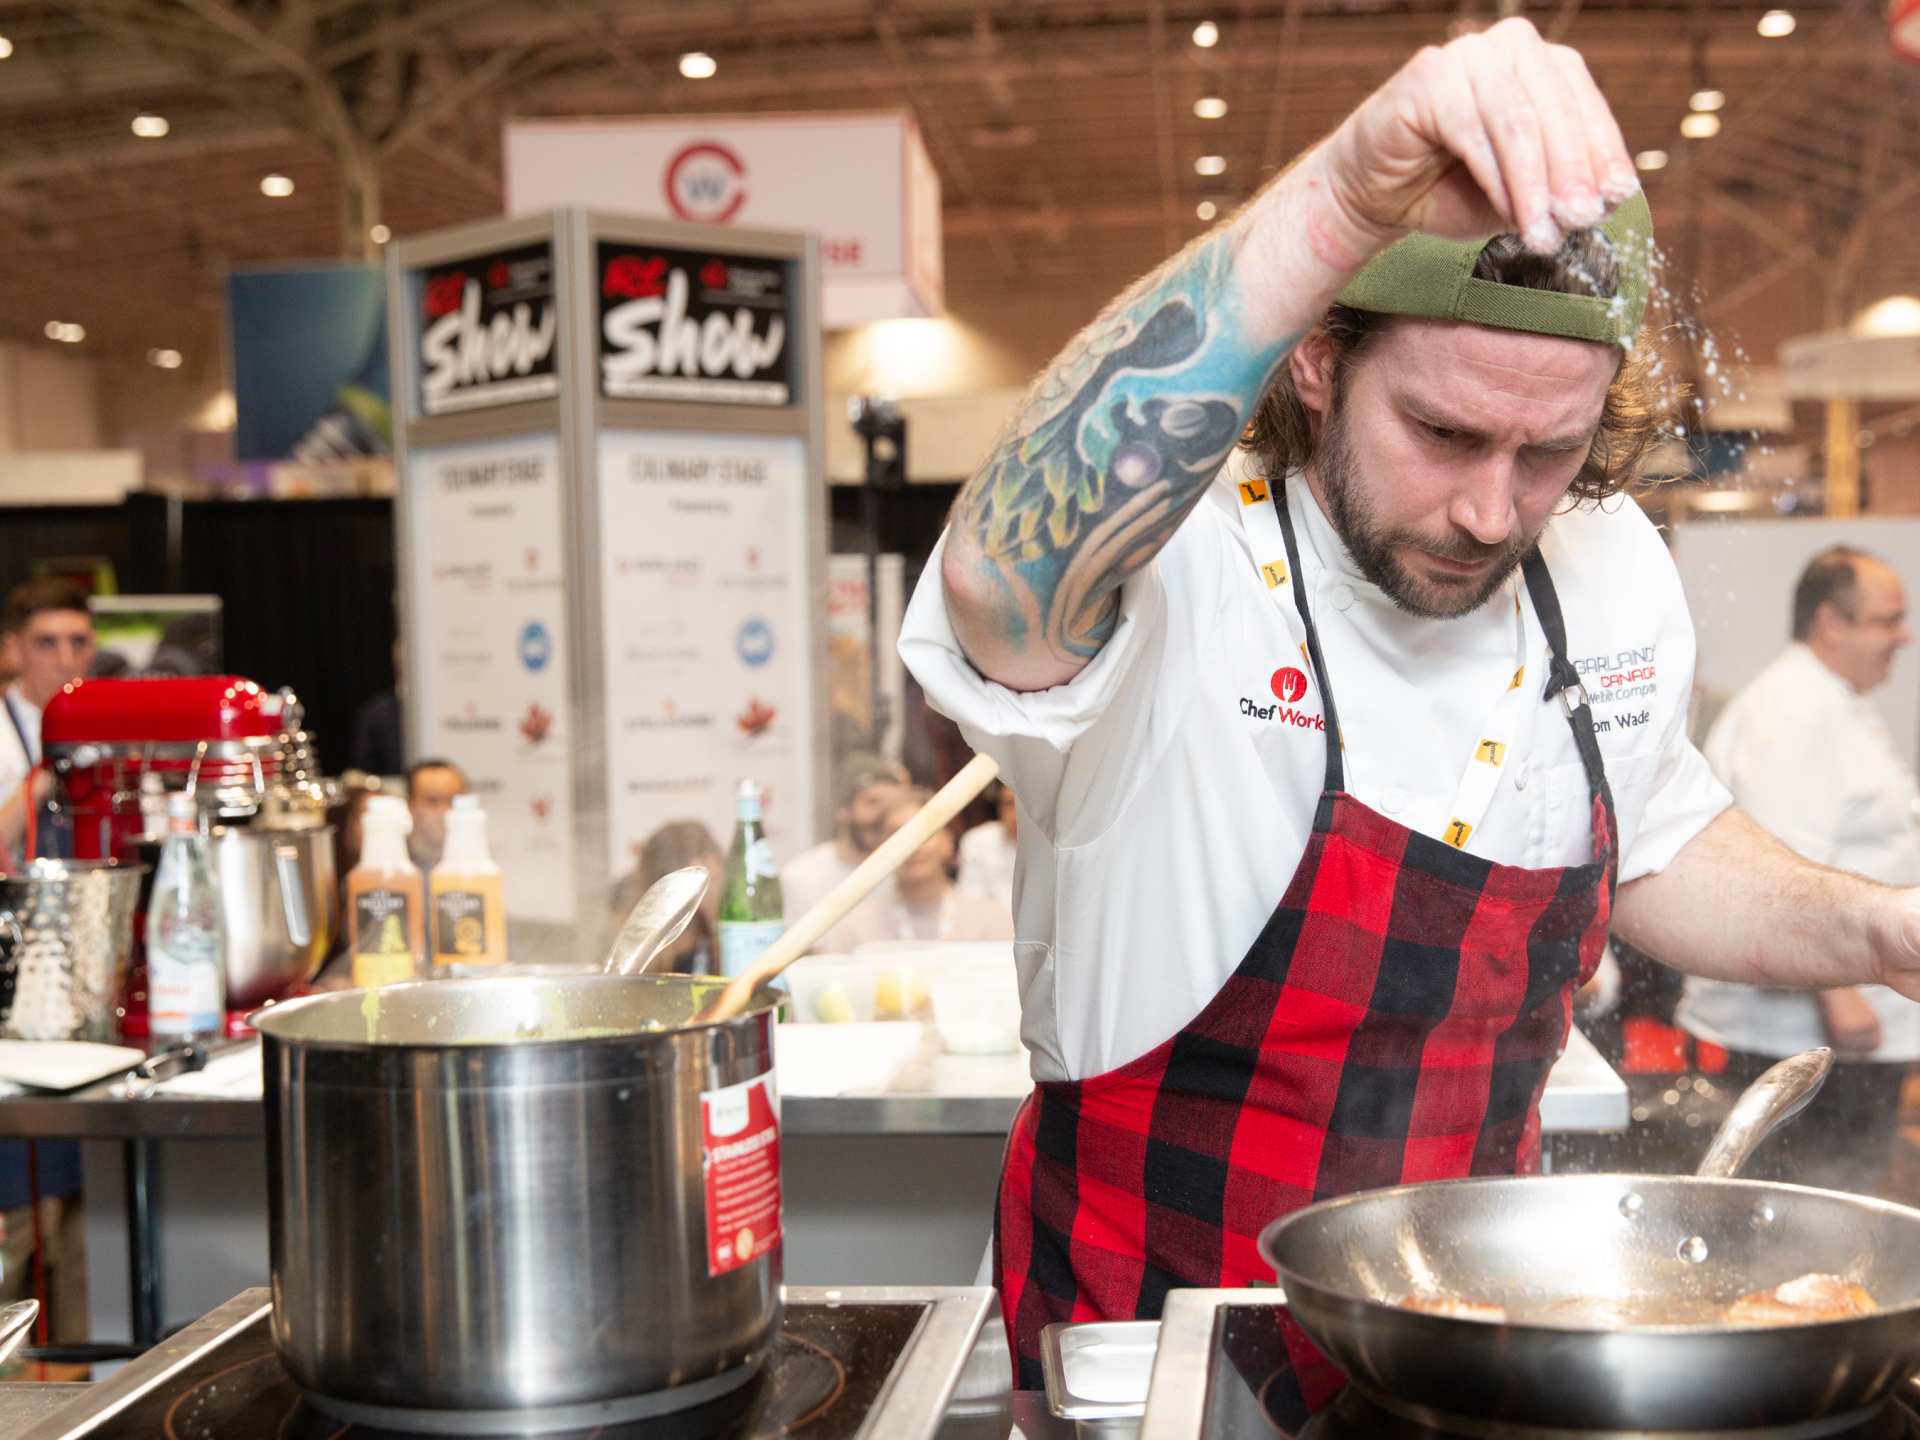 Things to do in Toronto| A cooking competition at RC Show